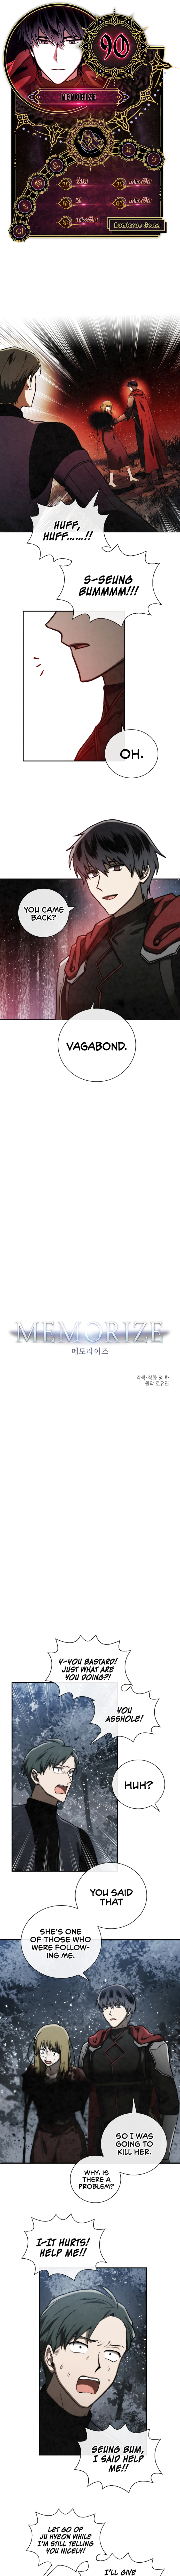 Memorize - Chapter 14594 - Image 1